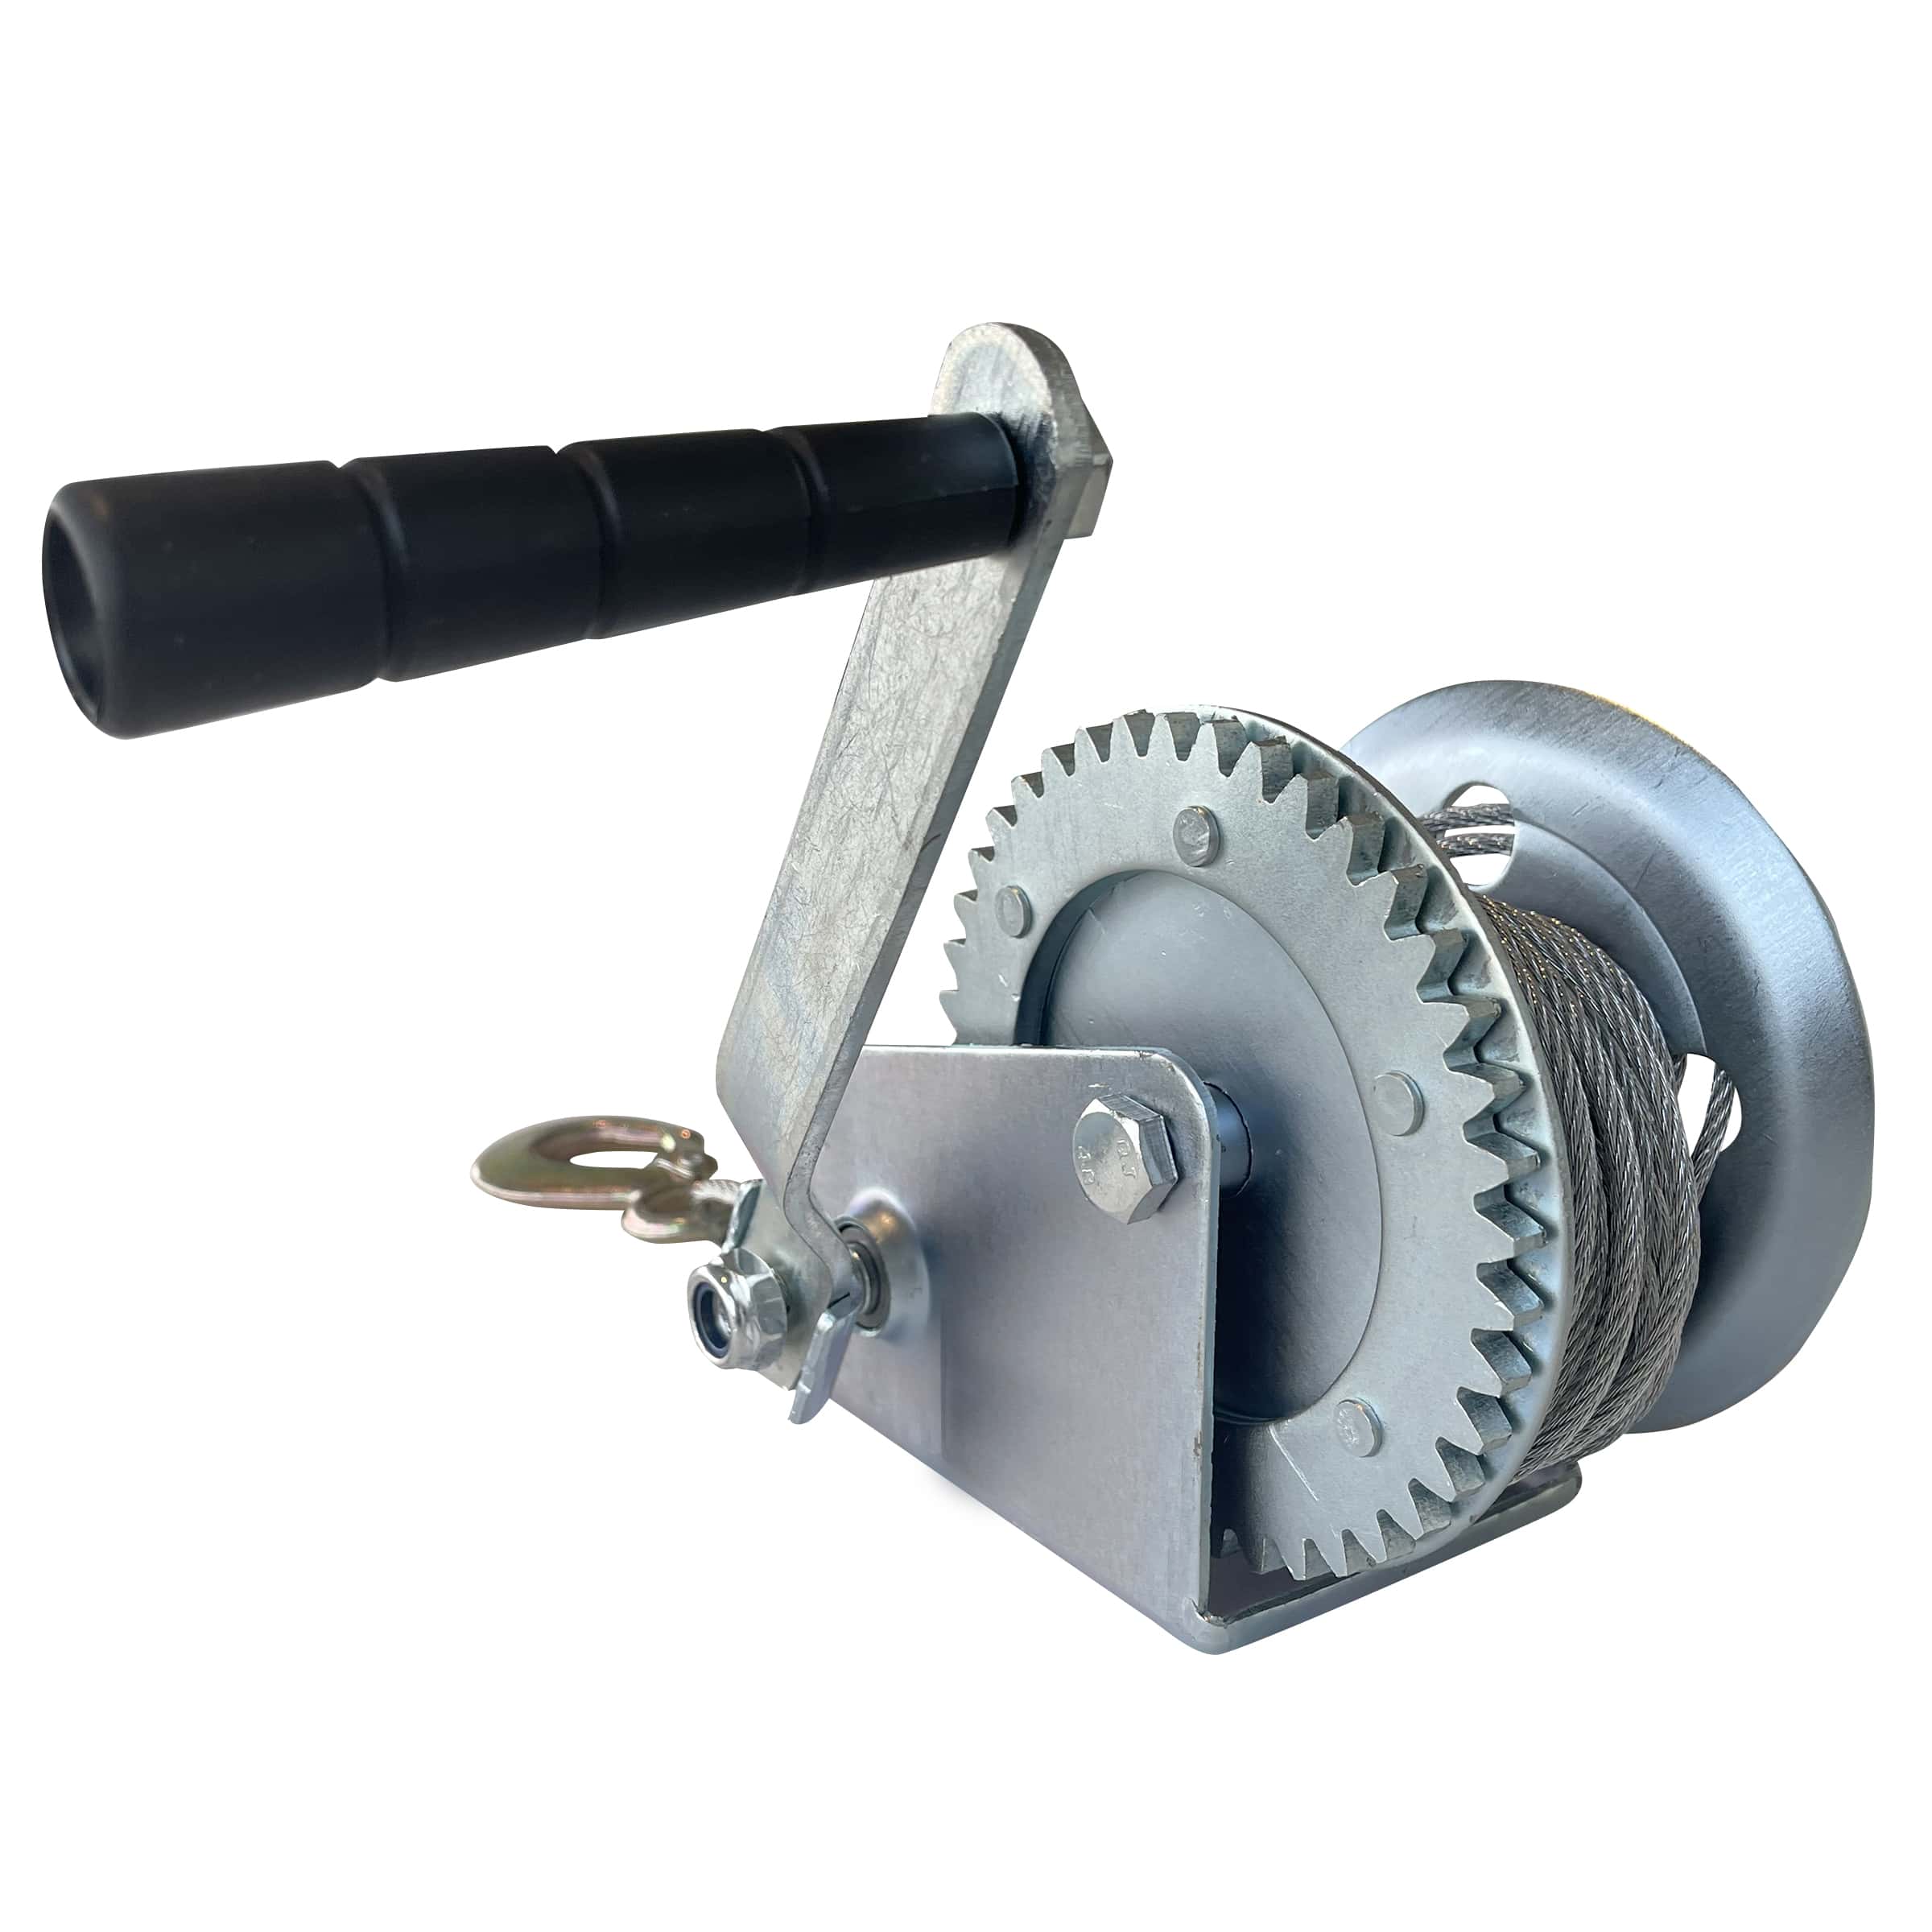 1,000 lb Hand Winch with Hook - Sportsman Series 